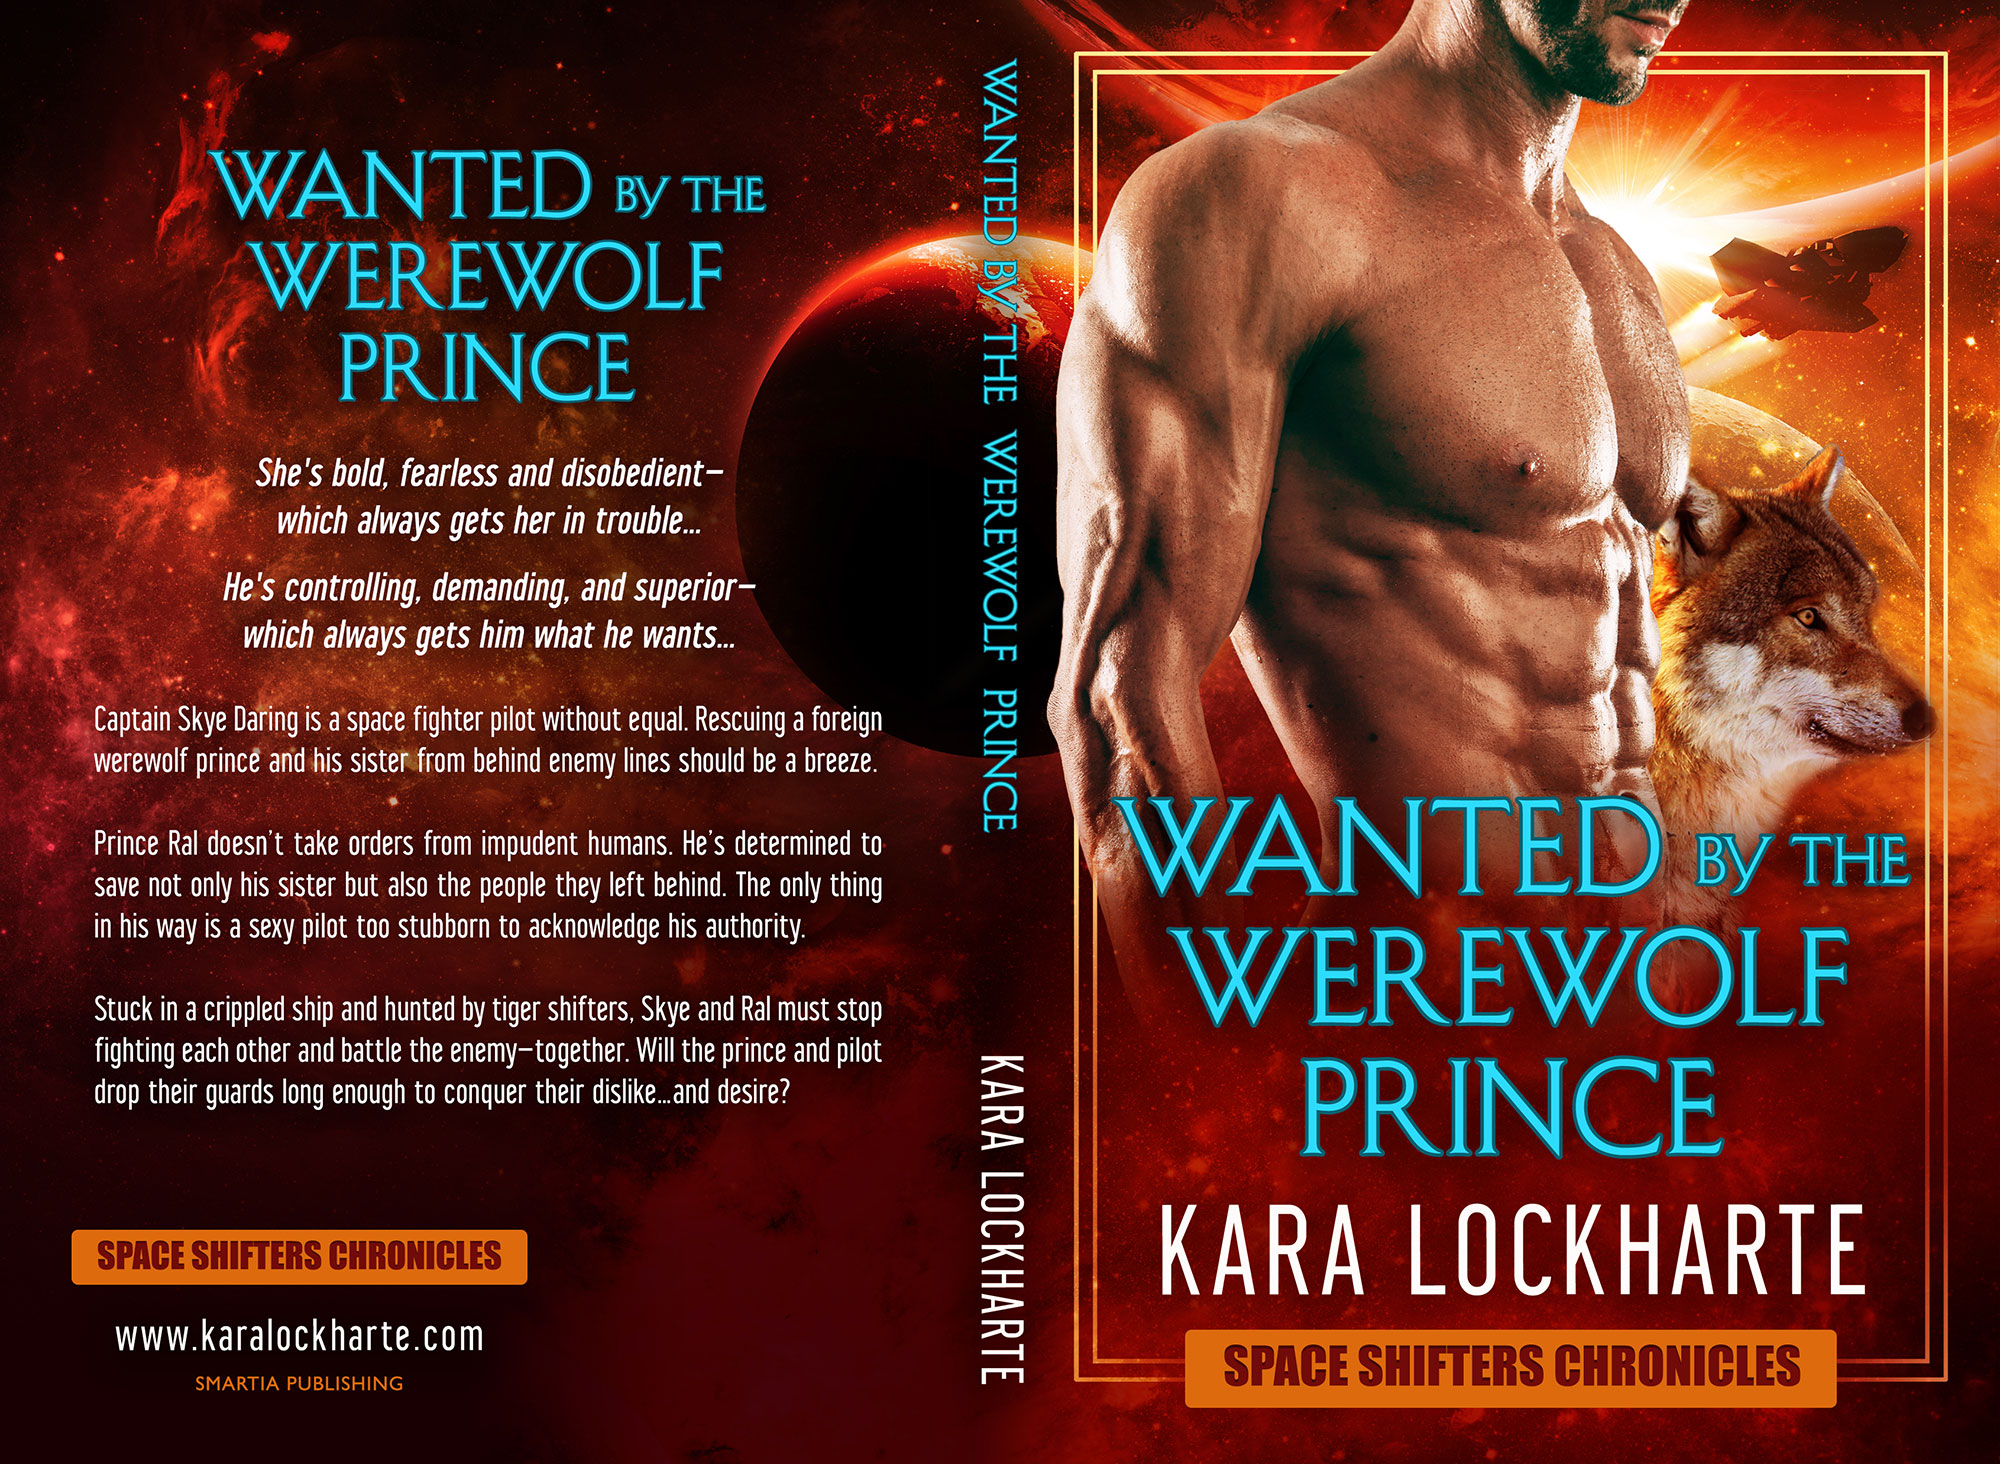 Wanted by the Werewolf Prince by Kara Lockharte (Print Coverflat)